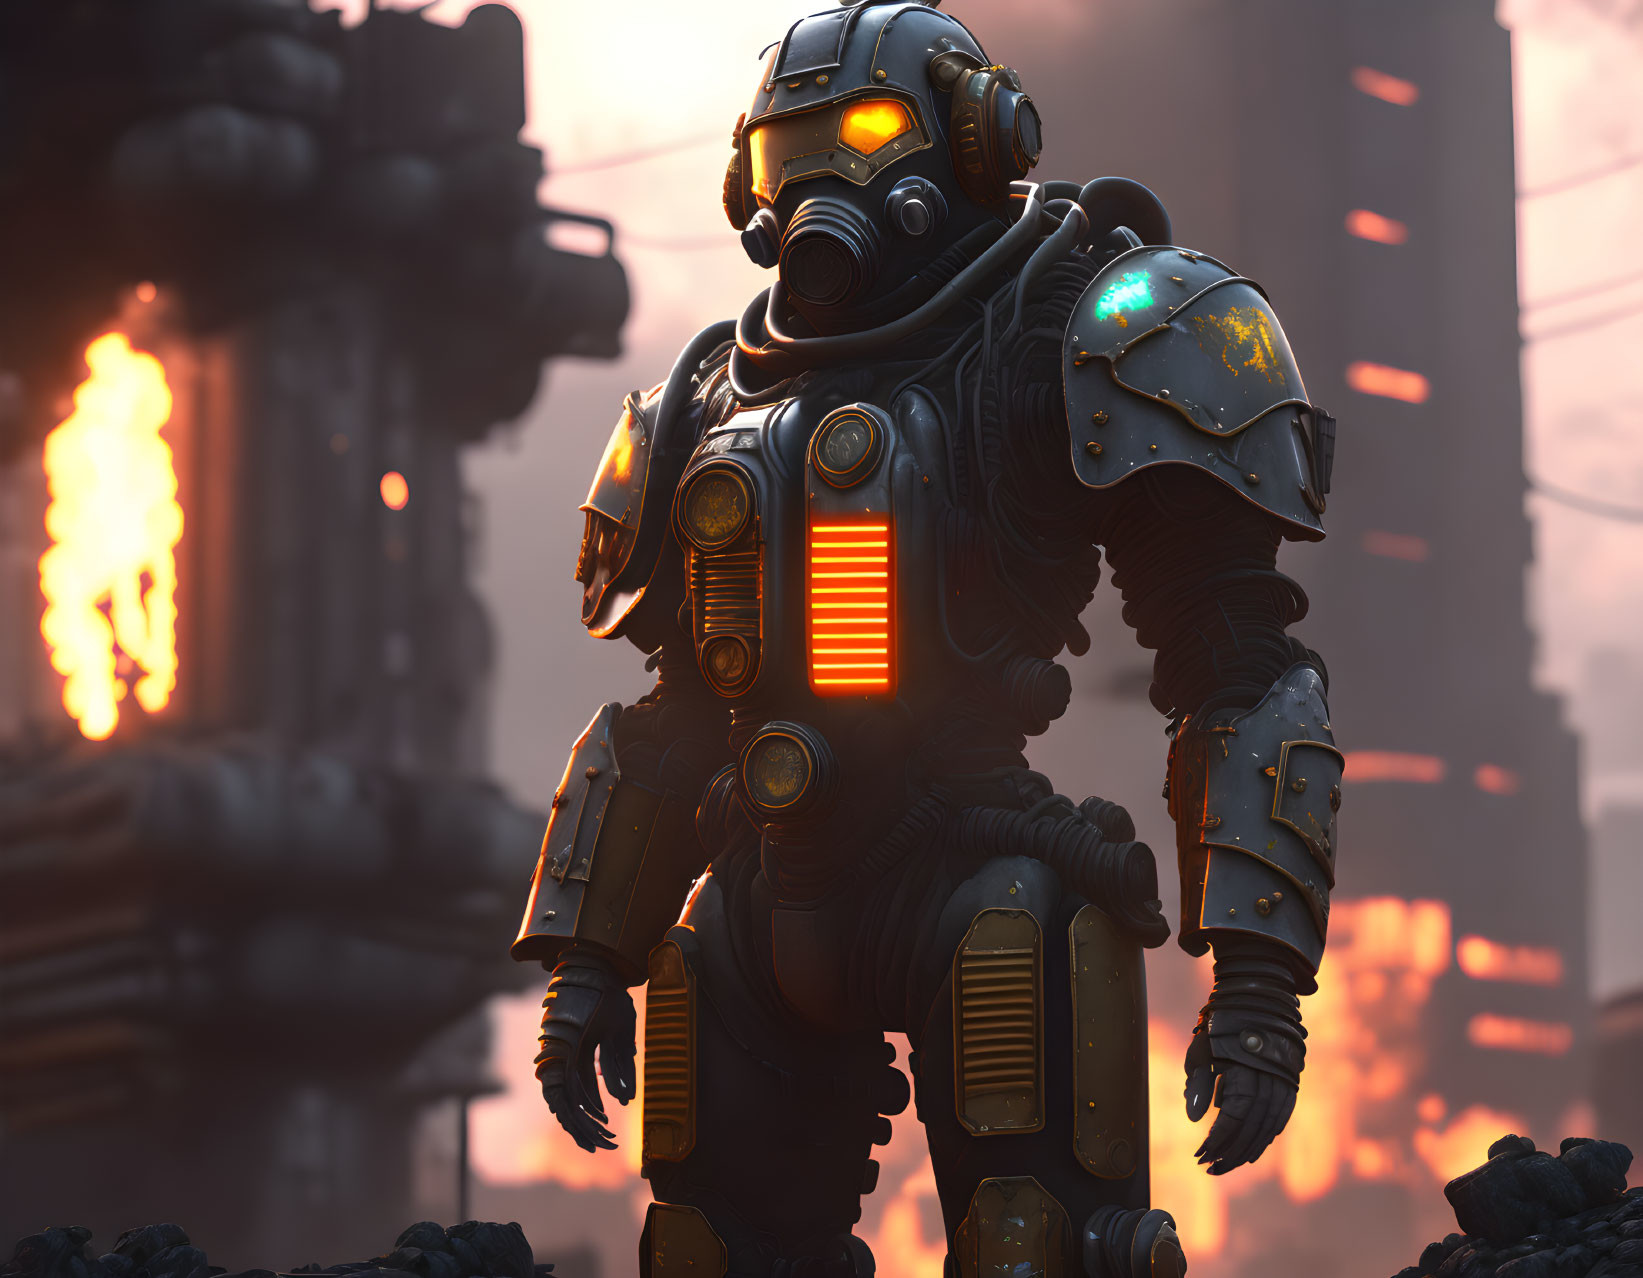 Futuristic armored robot in industrial wreckage with glowing orange visor